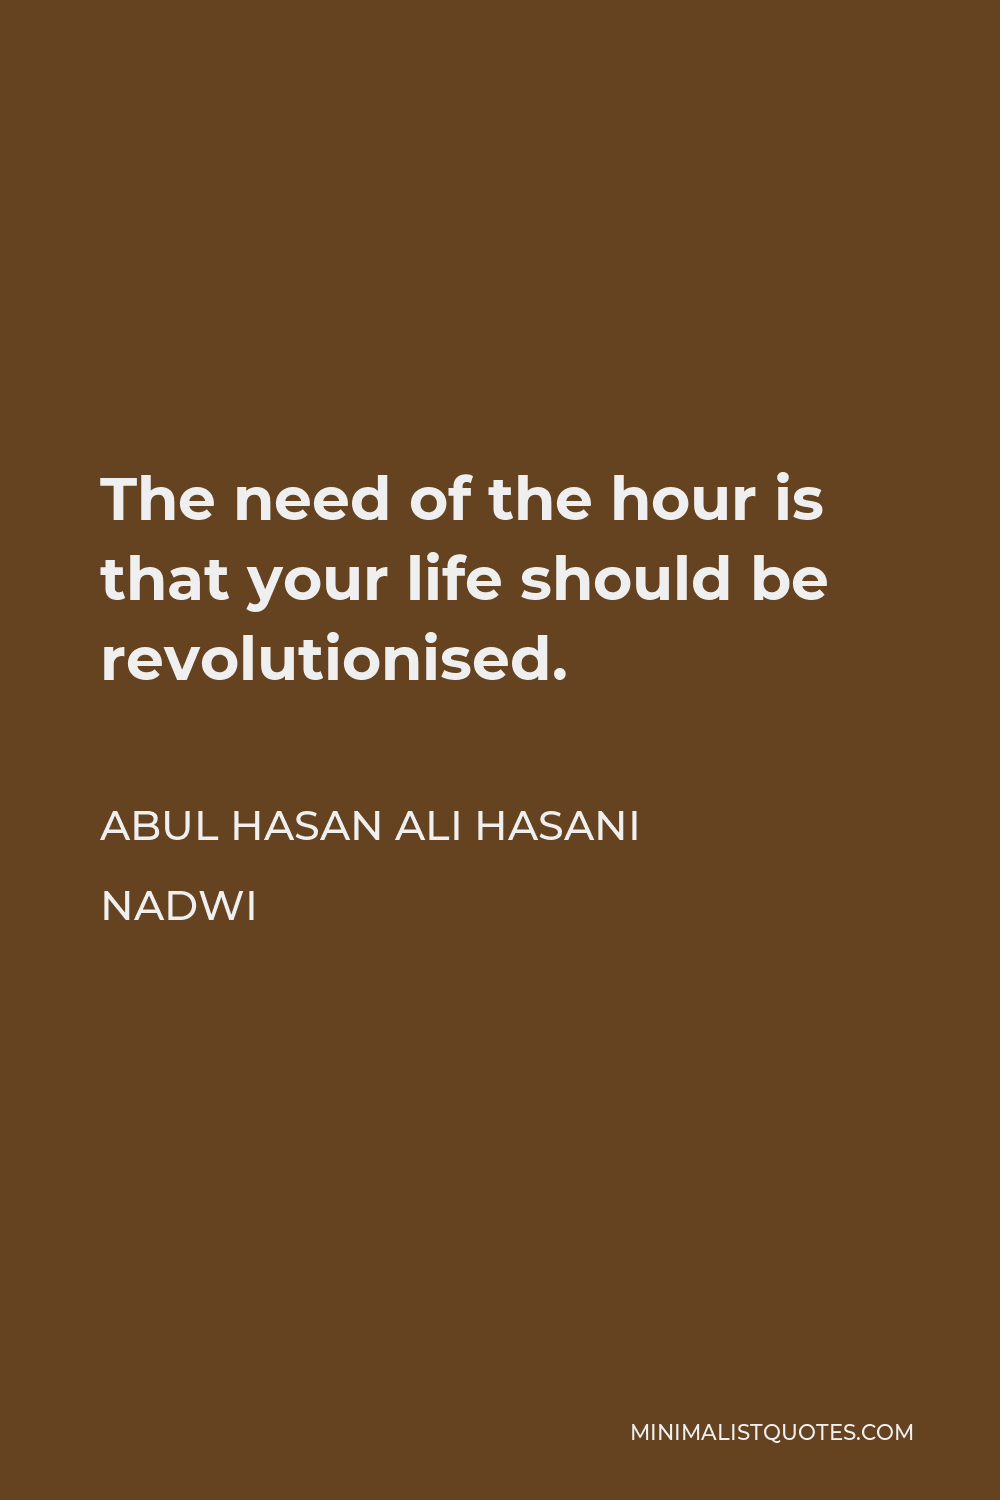 Abul Hasan Ali Hasani Nadwi Quote - The need of the hour is that your life should be revolutionised.